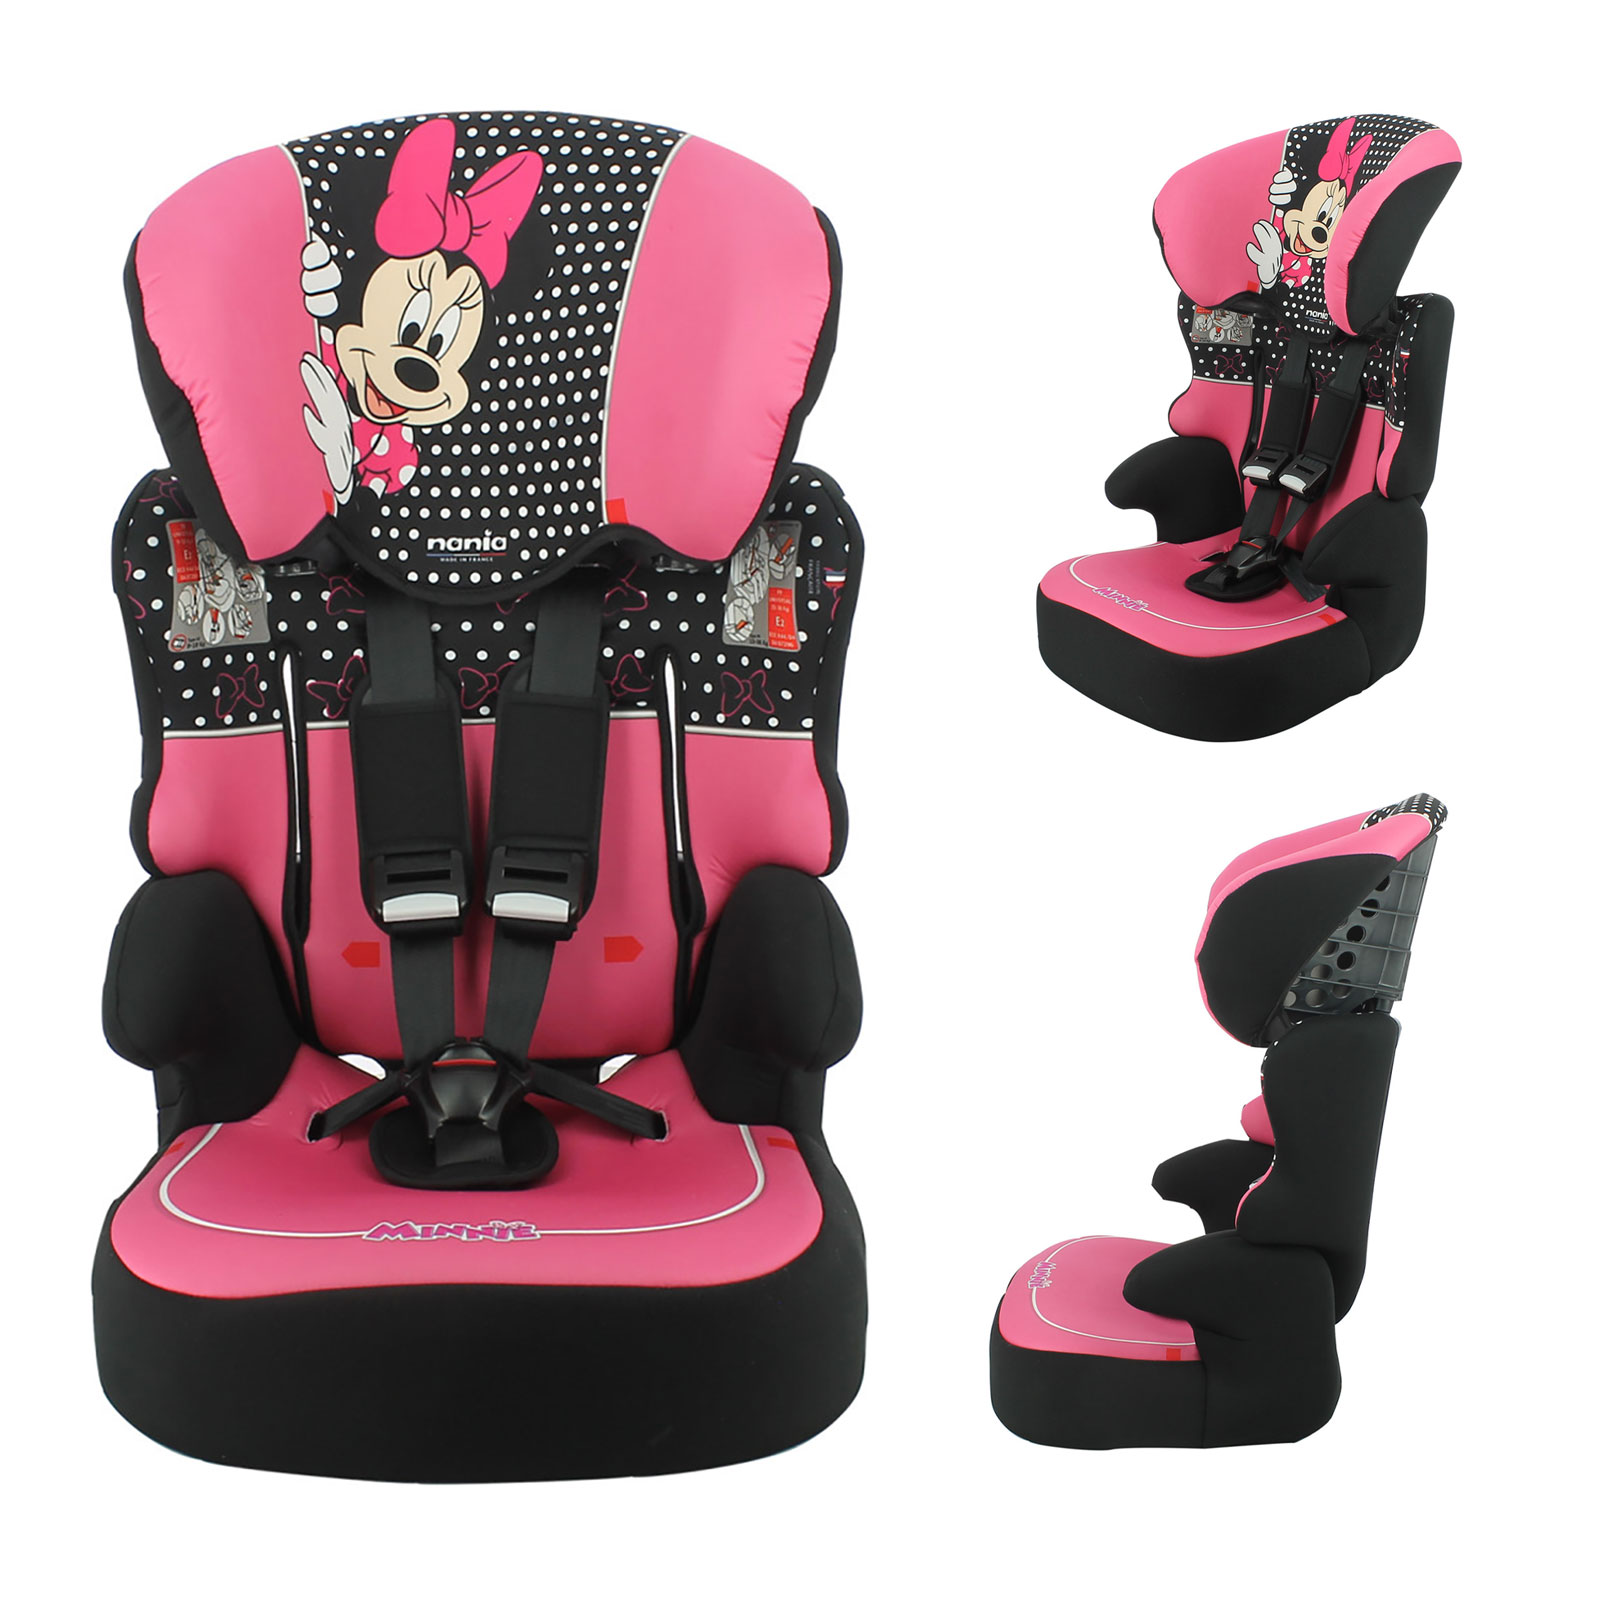 Disney Minnie Mouse Linton Comfort Plus Group 1/2/3 Car Seat - Pink (9 Months-12 Years)